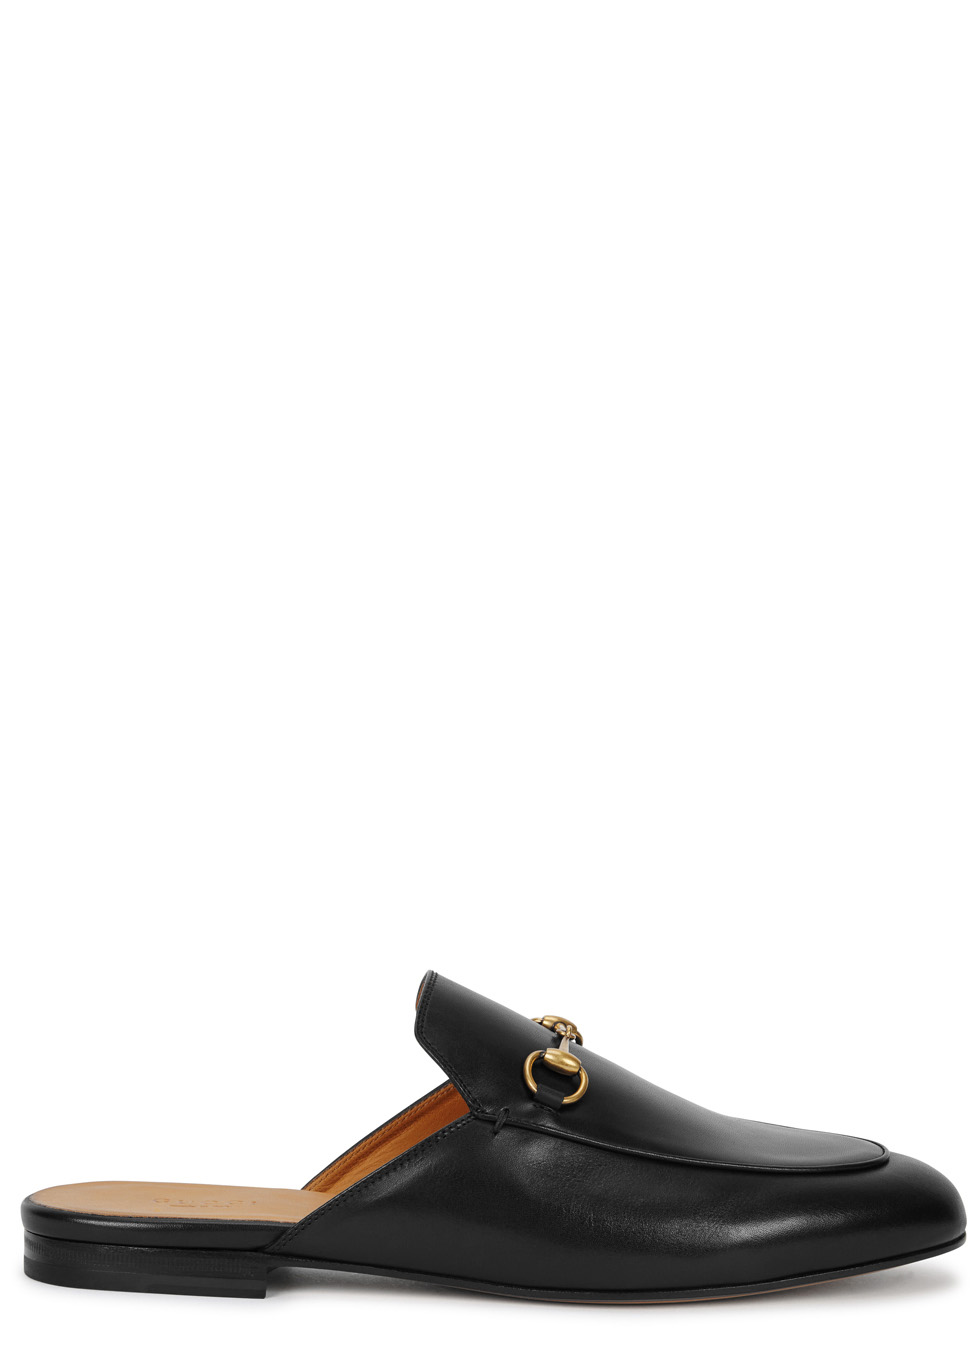 mens gucci backless loafers